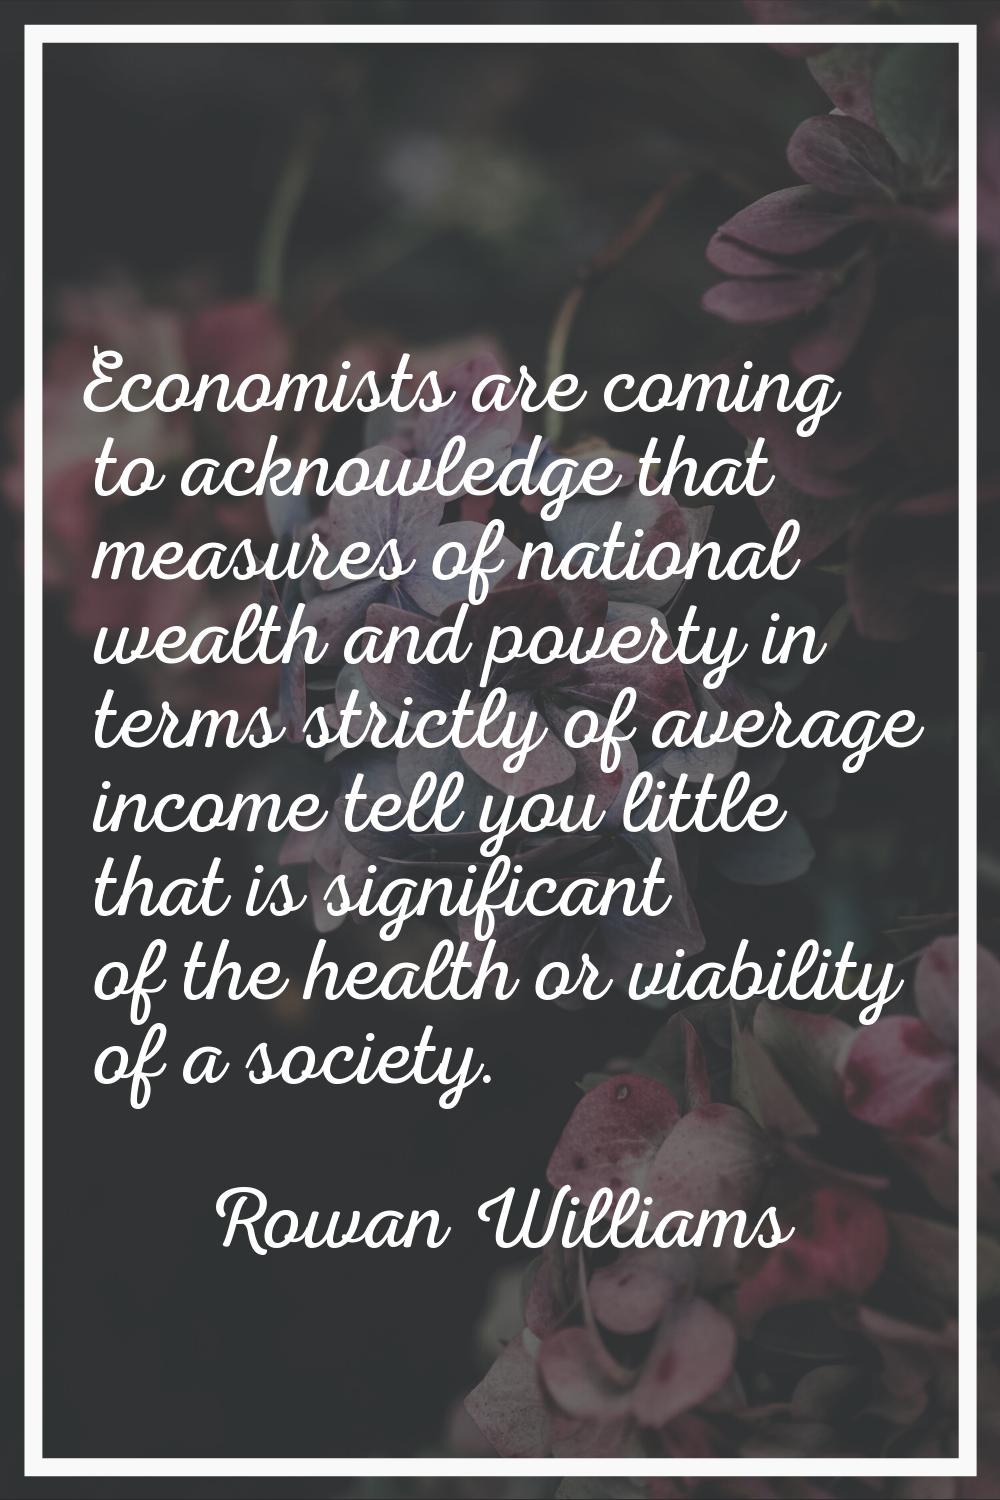 Economists are coming to acknowledge that measures of national wealth and poverty in terms strictly